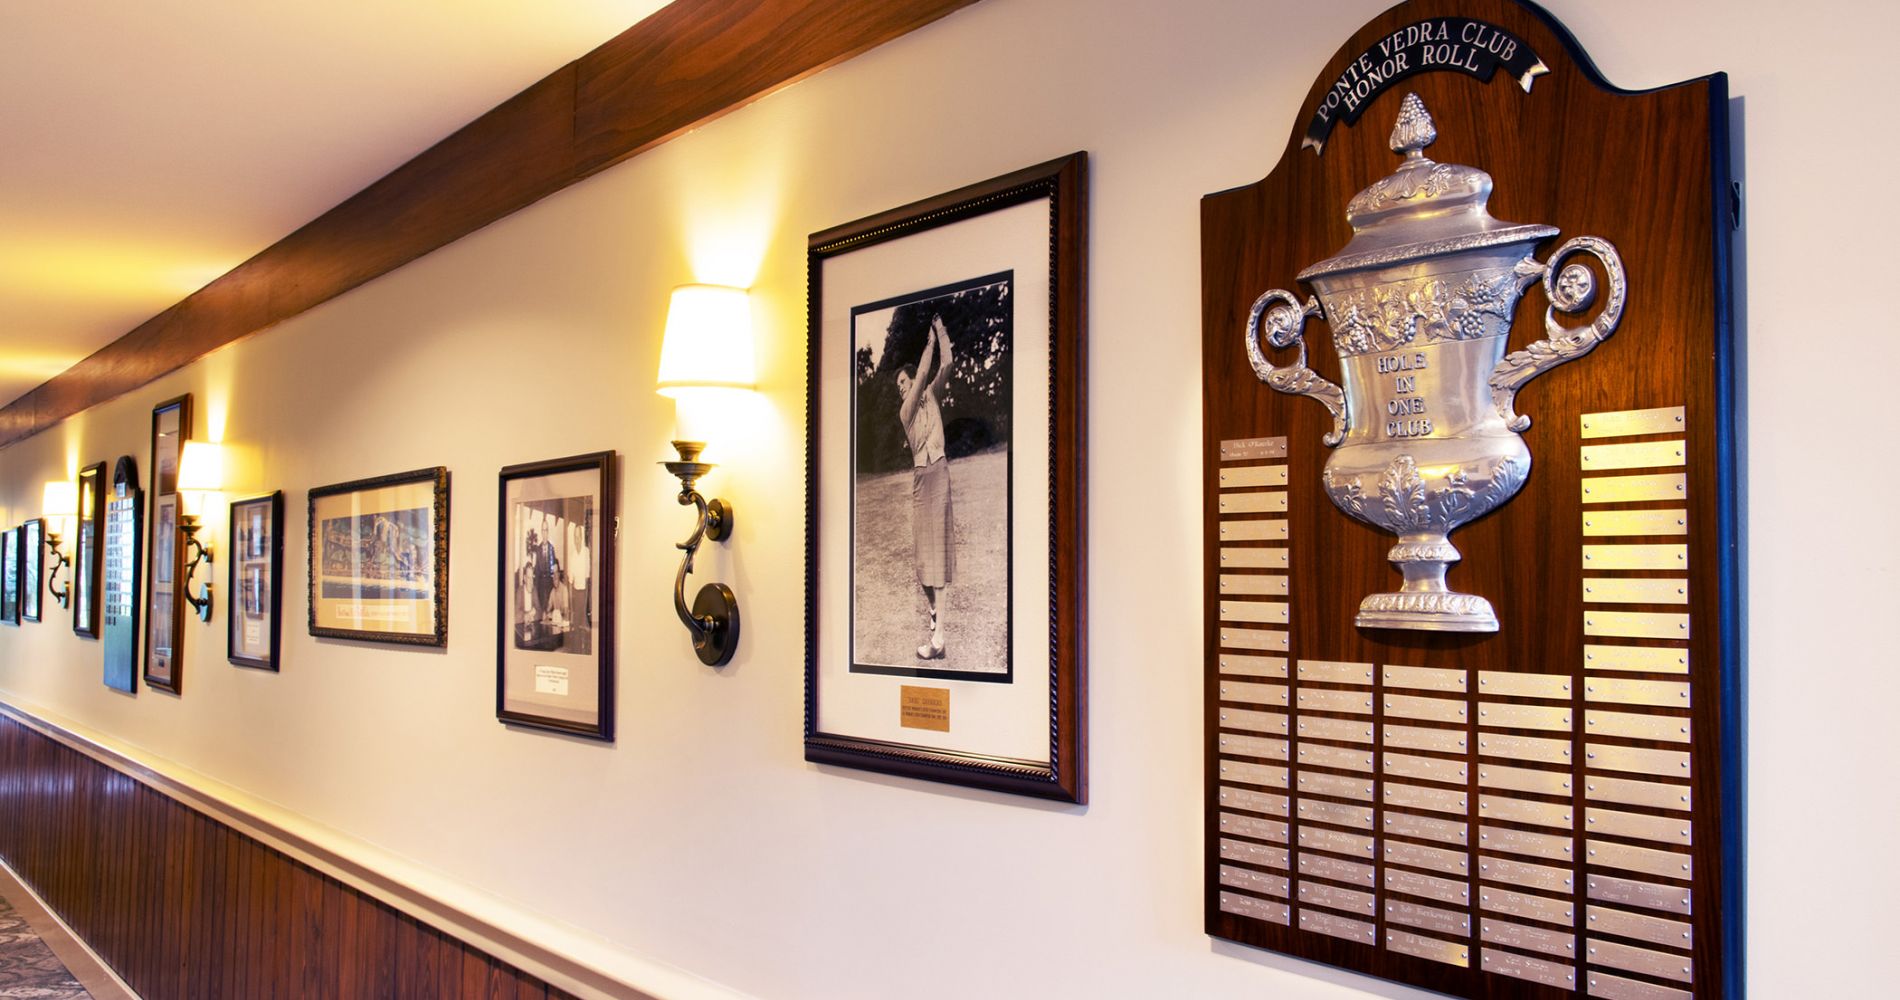 Historic golf photos and plaques on display in the club house hallway